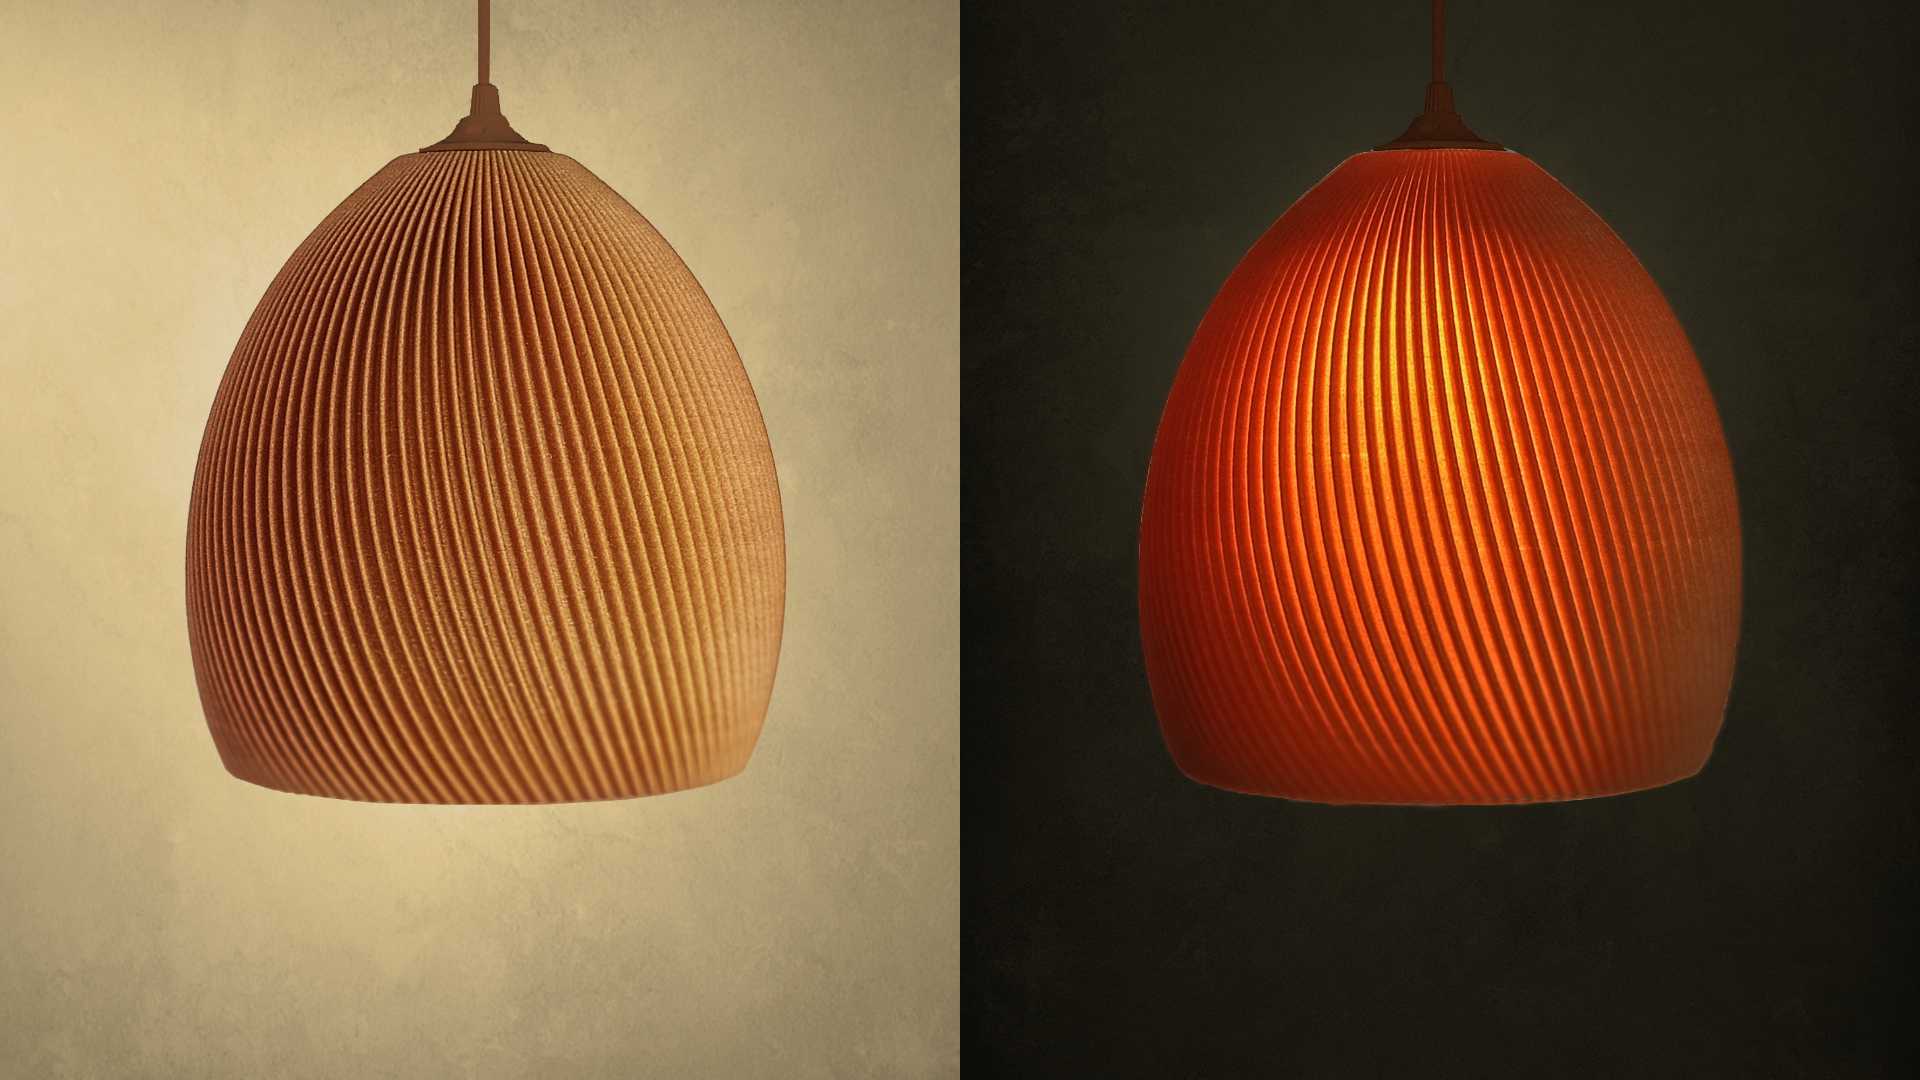 It’s not wood… It’s wheat bran! Brano Vortico – new ECO Lamp in the COLORISED offer